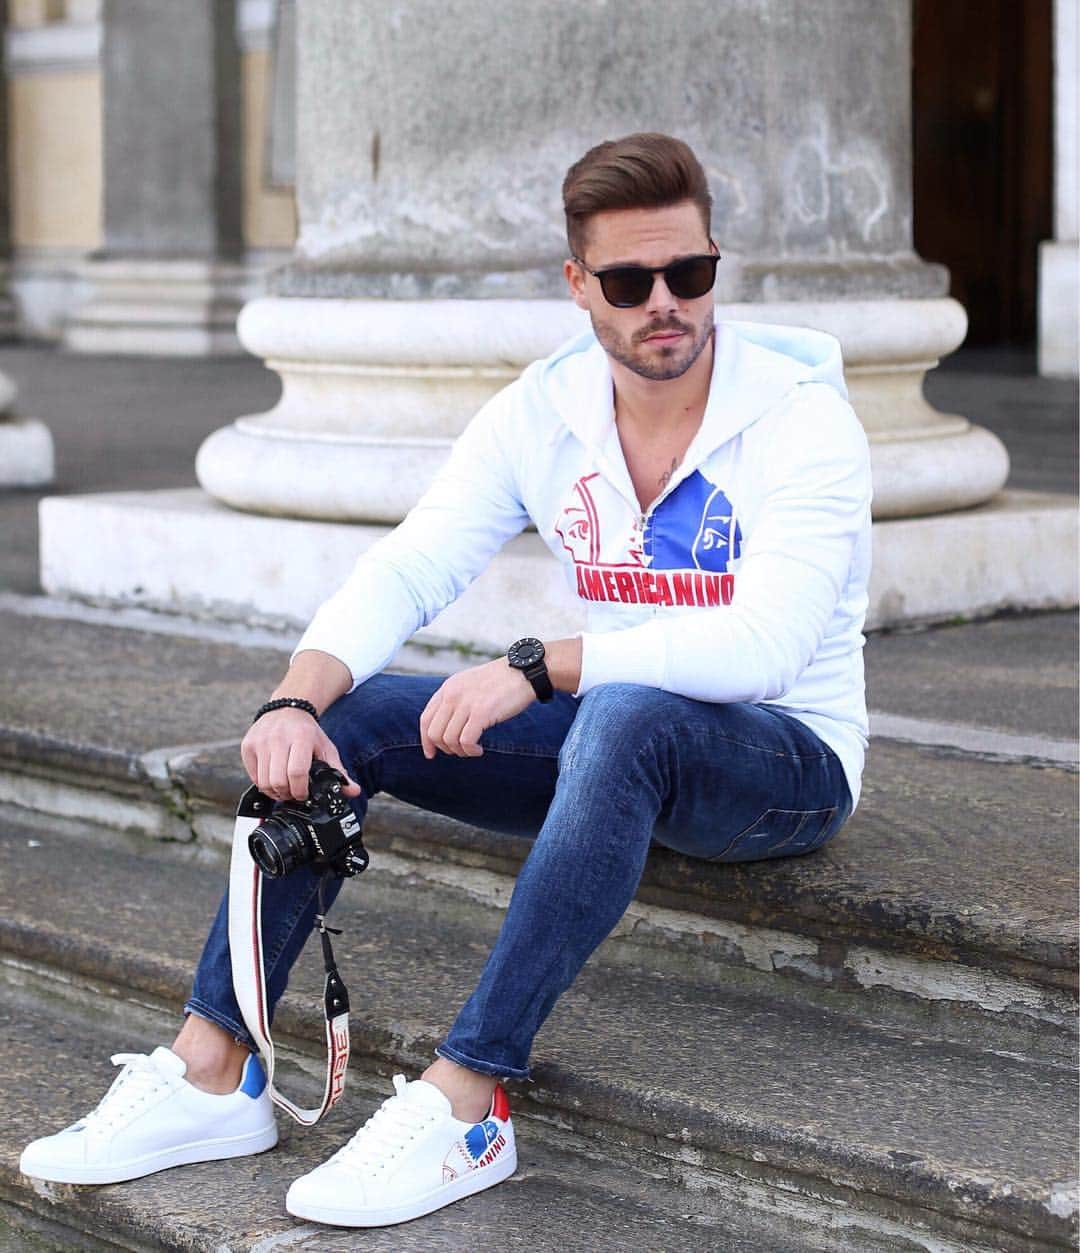 Stefano Trattoのインスタグラム：「Staying comfy! Have a nice day guys! Wearing @americanino_it #iamericanino」